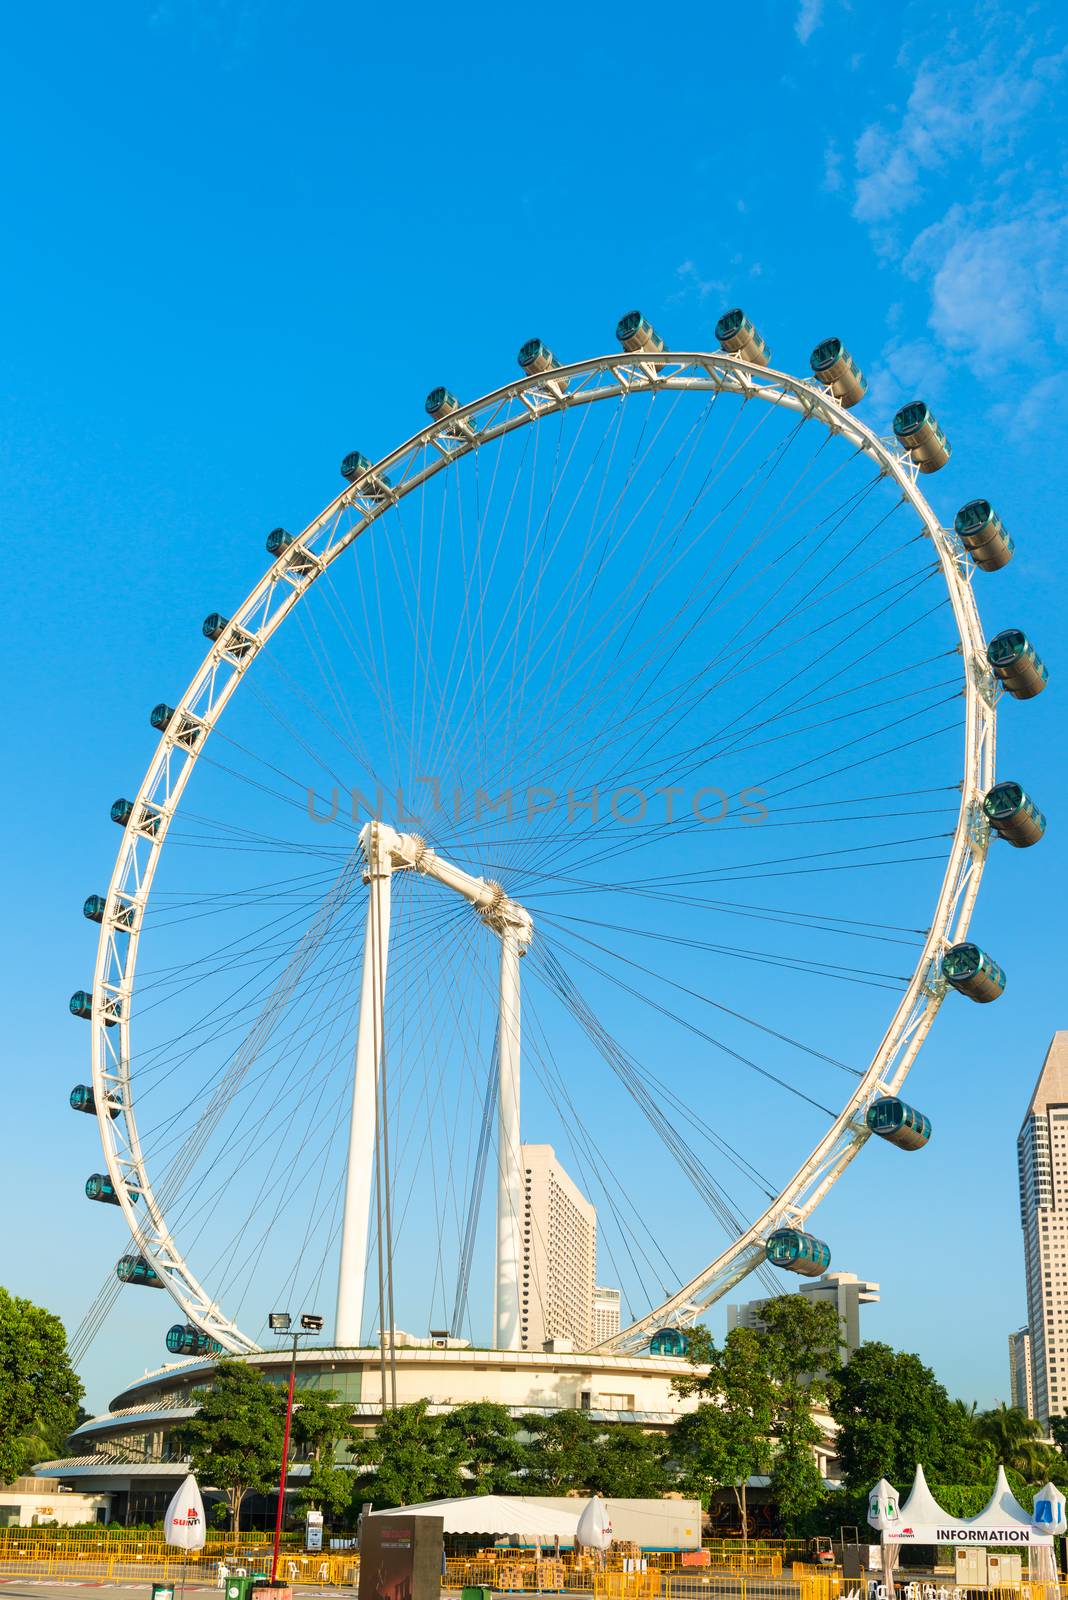 SINGAPORE - 06 JUN 2013: Singapore Flyer is a giant Ferris wheel in Singapore. It was the world's tallest Ferris wheel until March 2014.